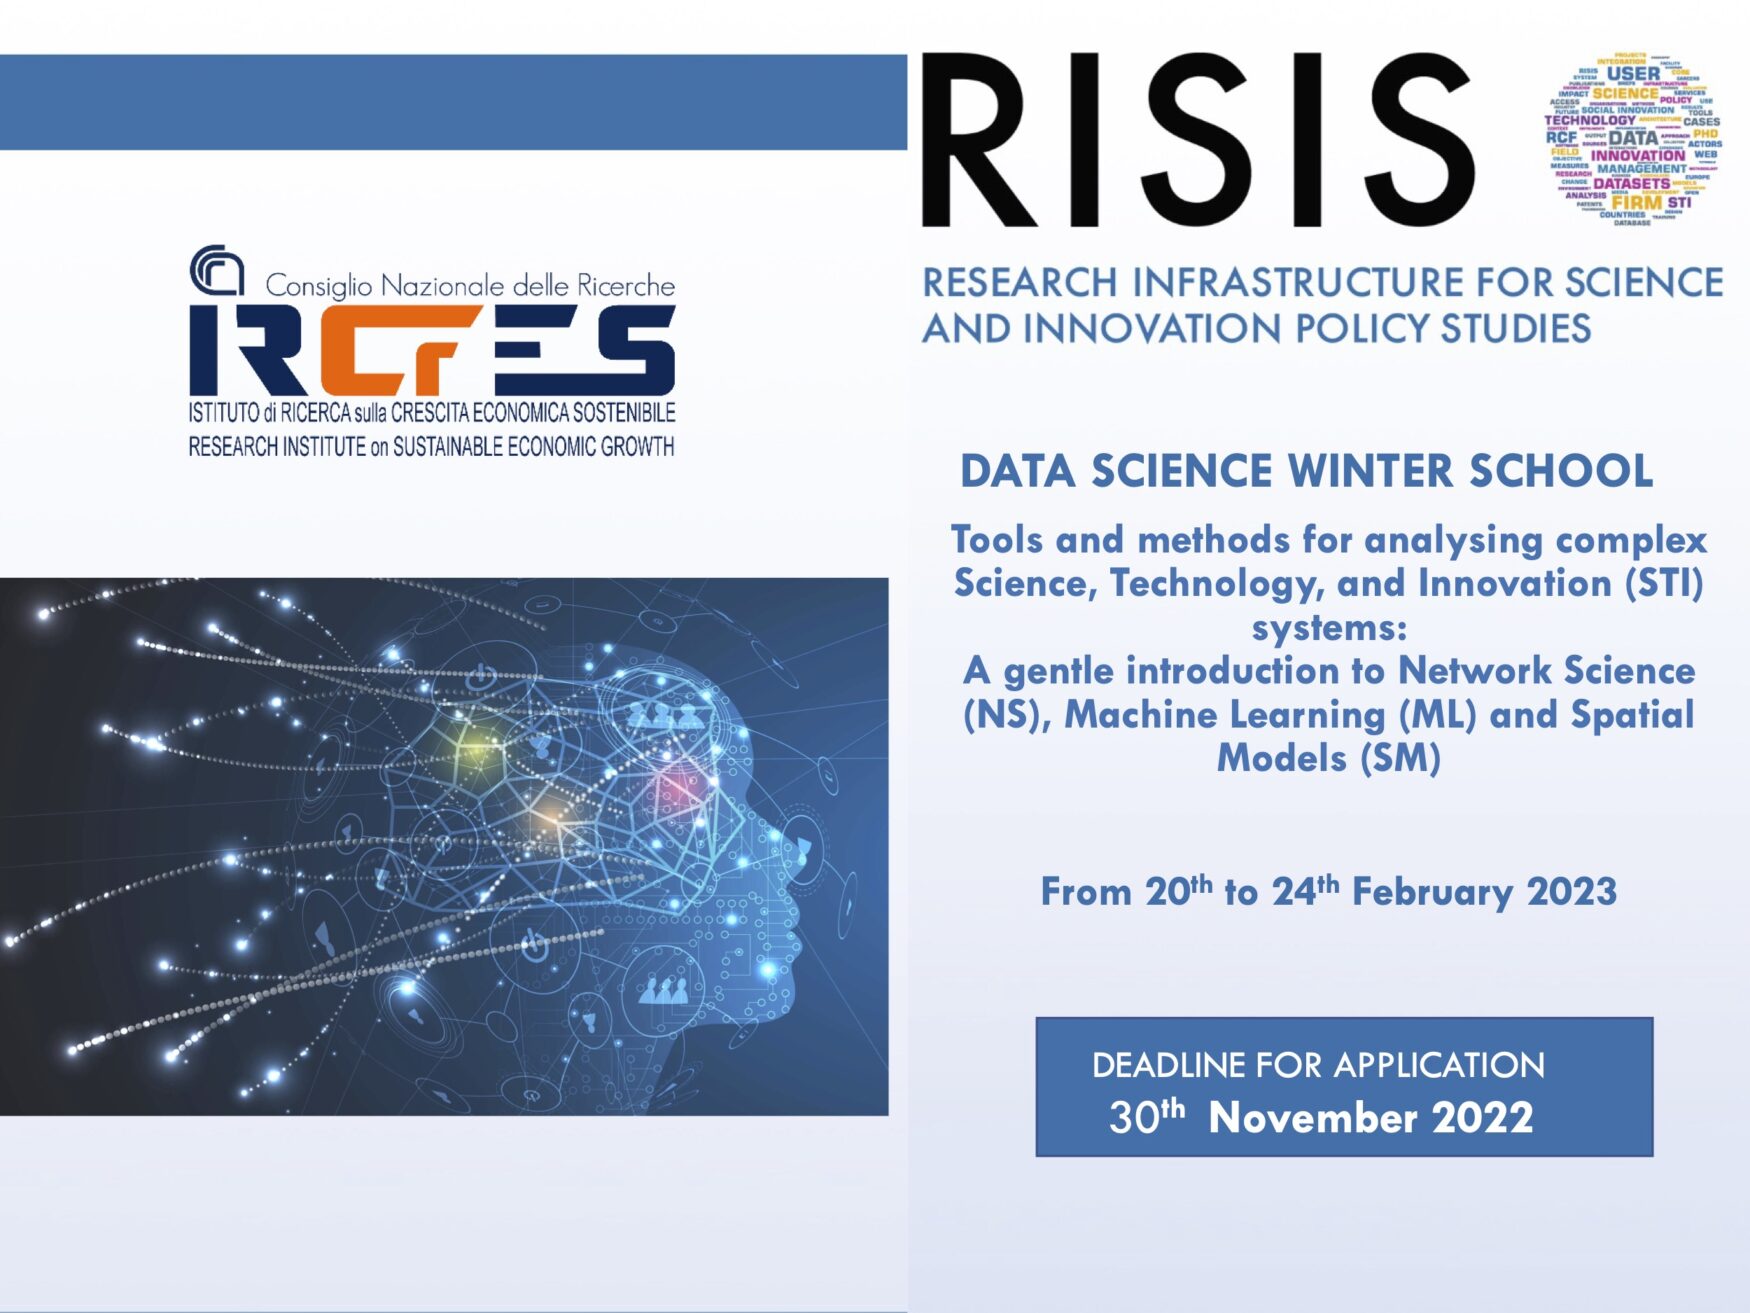 RISIS Data Science Winter School on Tools and methods for analysing complex Science, Technology and Innovation (STI) systems